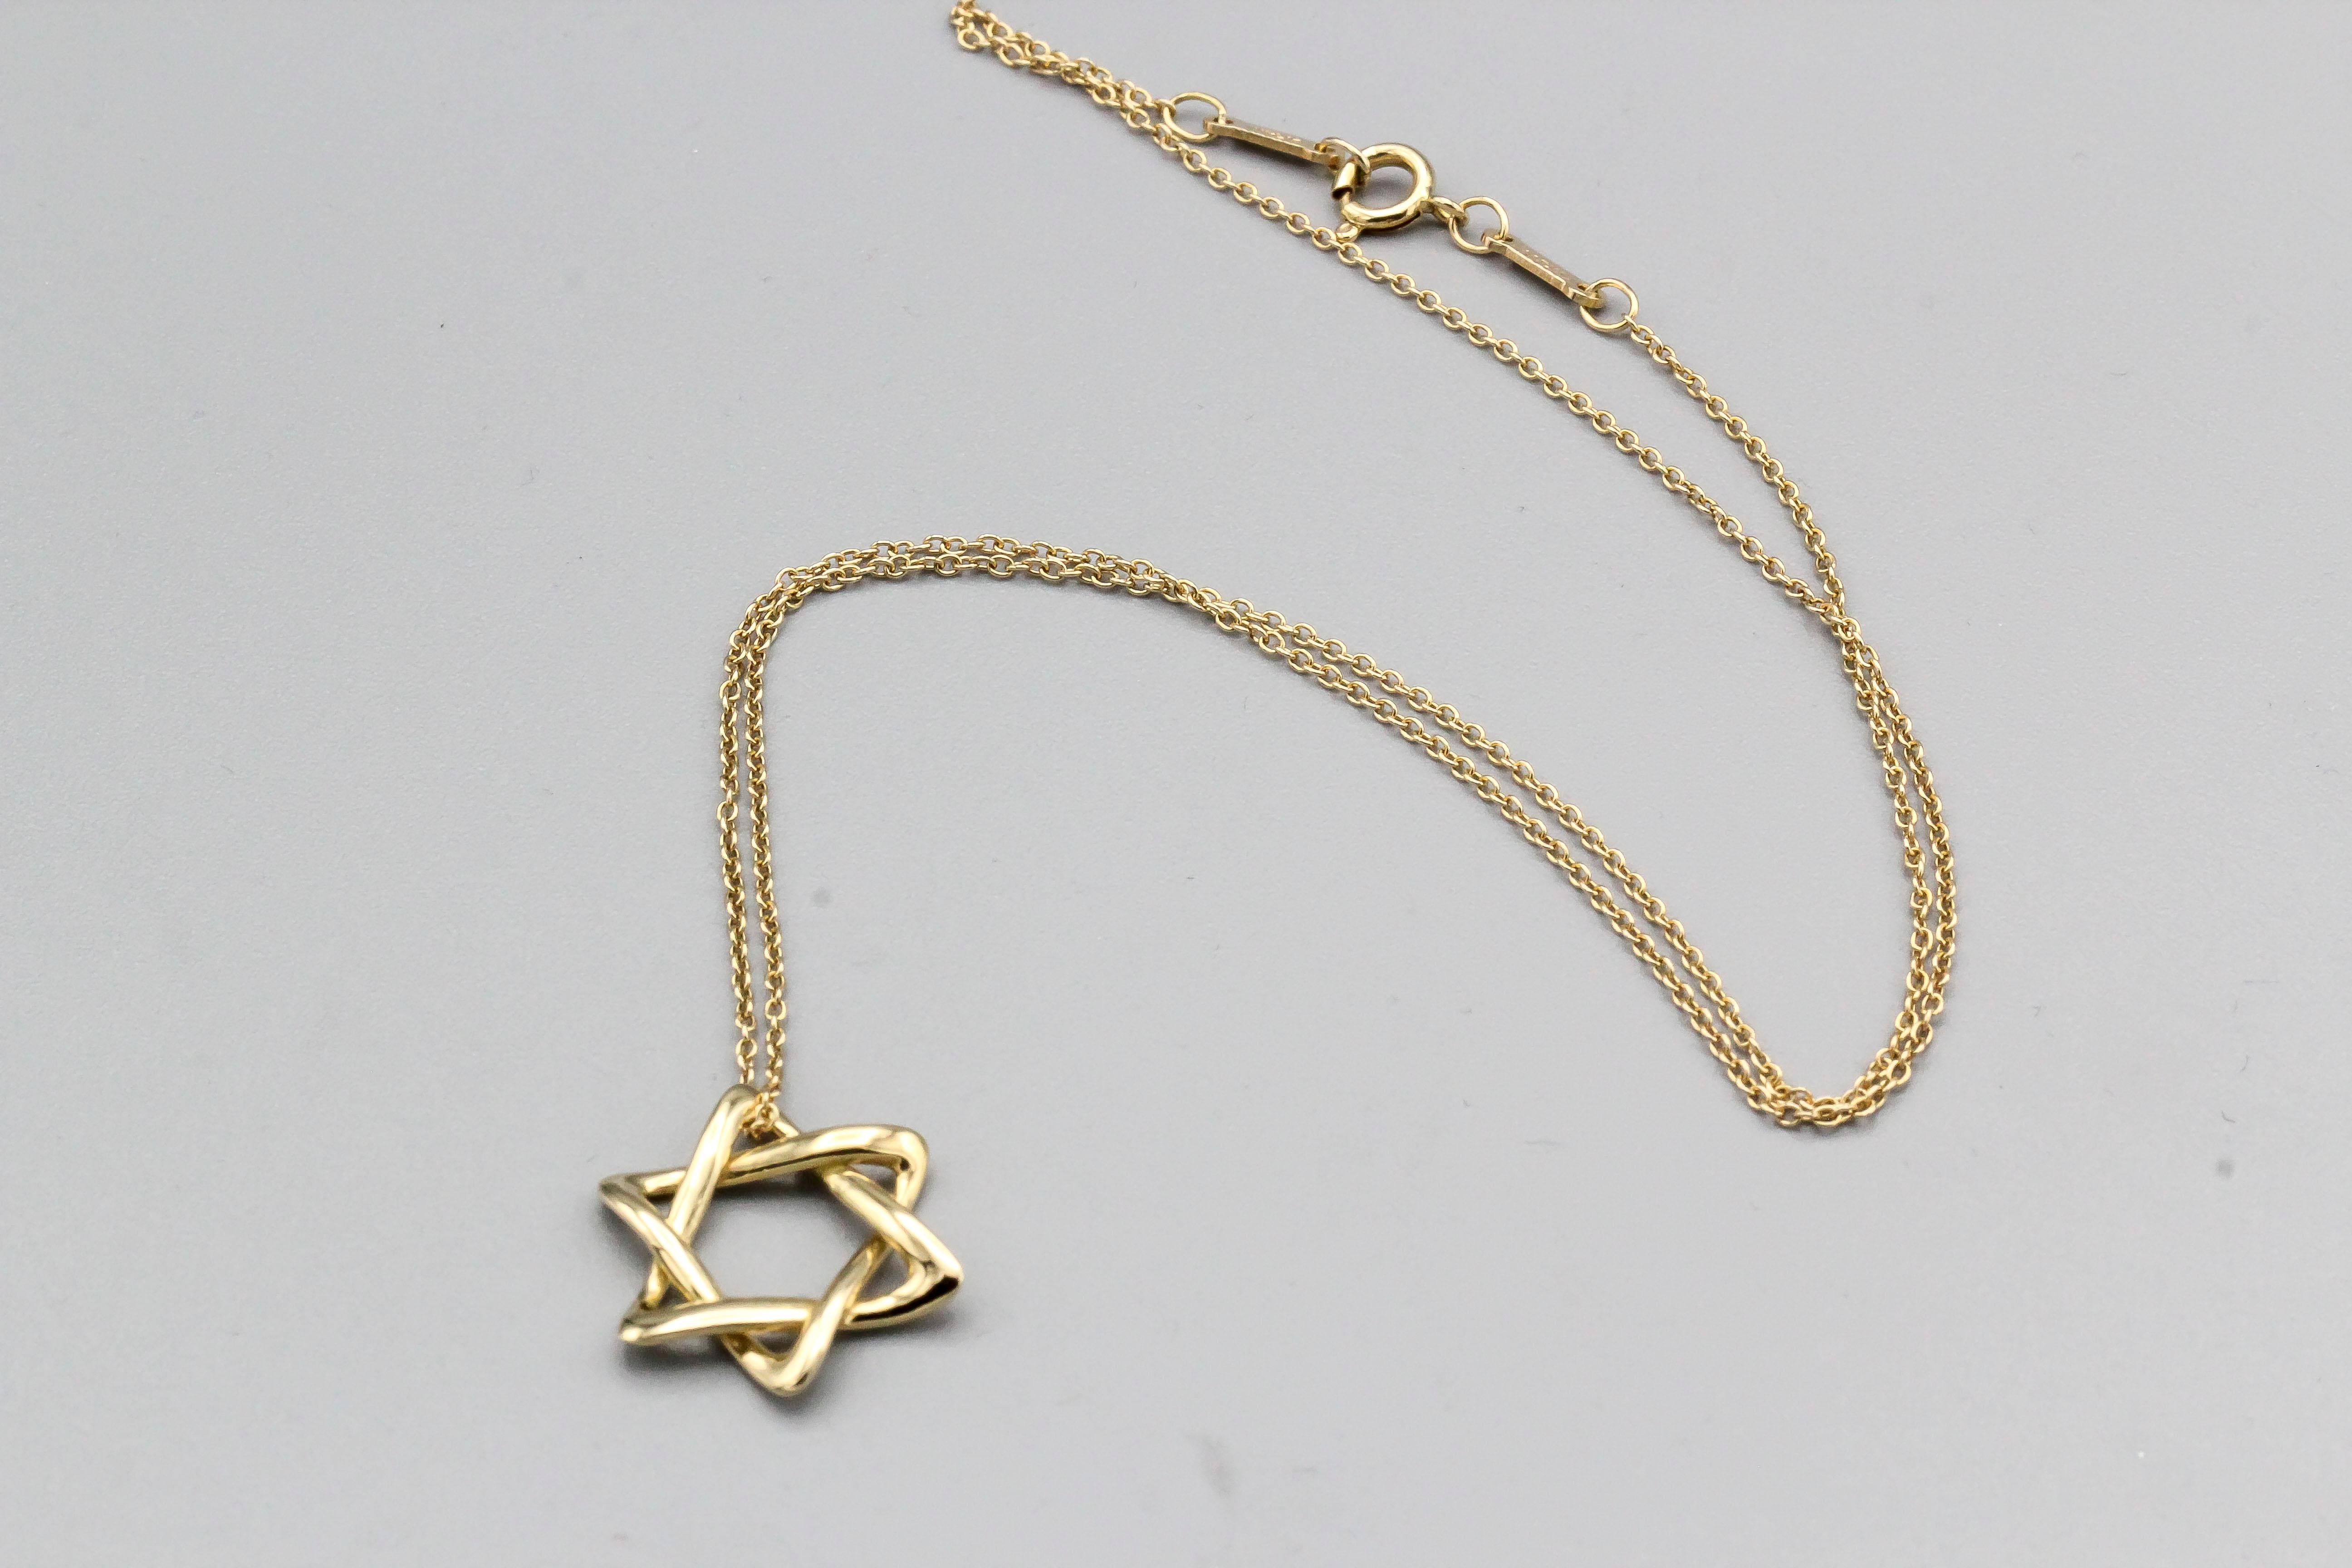 Fine 18K yellow gold David's Star necklace by Tiffany & Co., Elsa Peretti. This is the larger of two sizes and currently retails for $1350. Chain length is 16